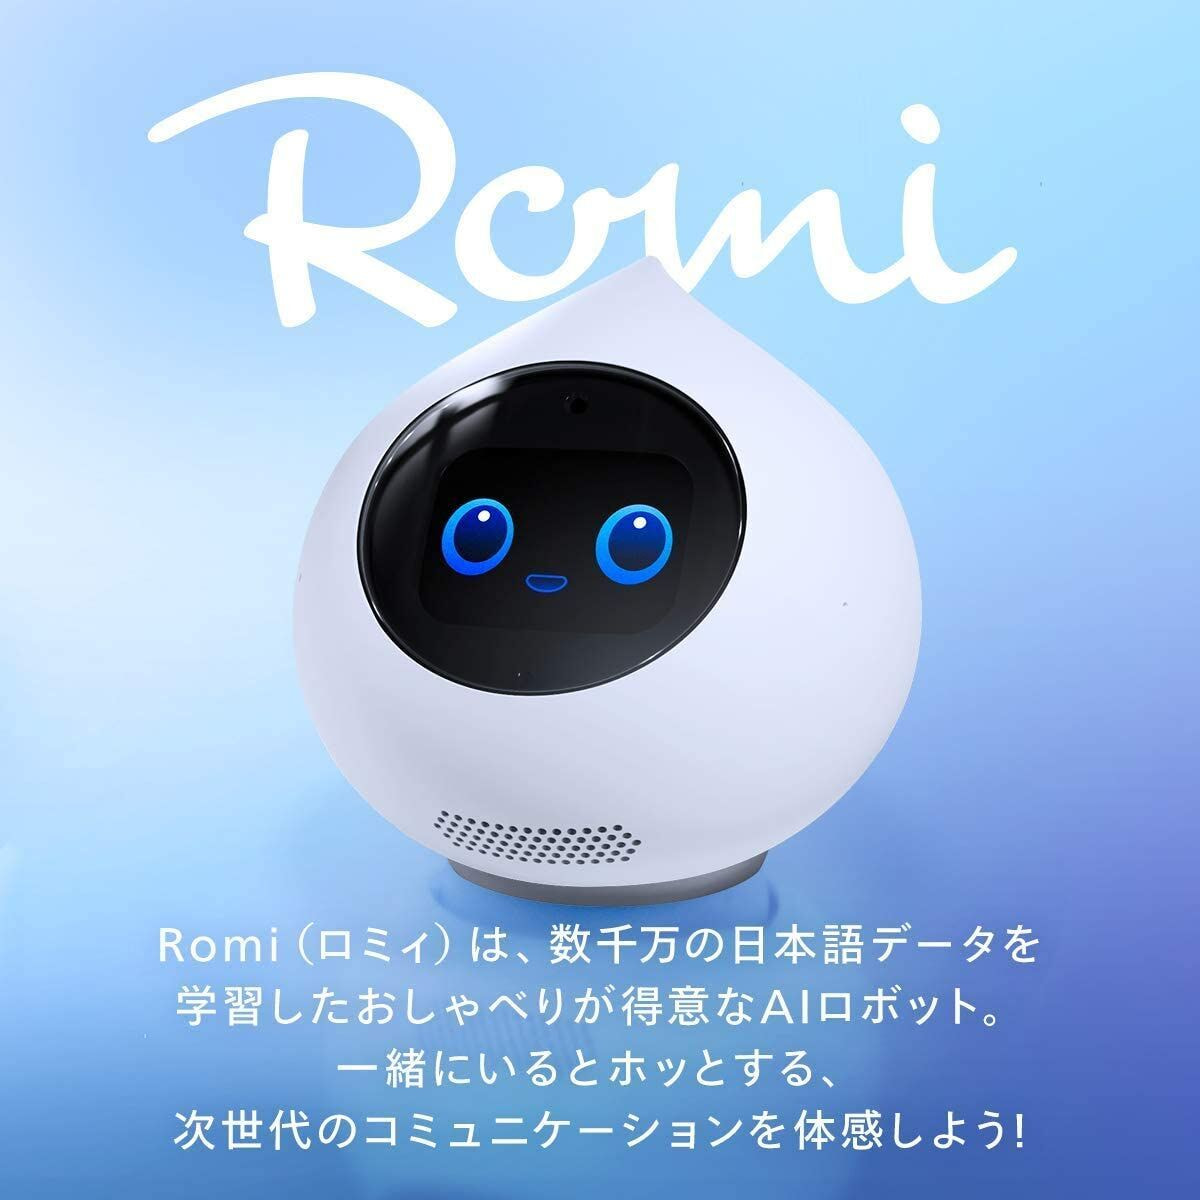 Romi ロミィ ロボット☆新品未使用☆ - その他